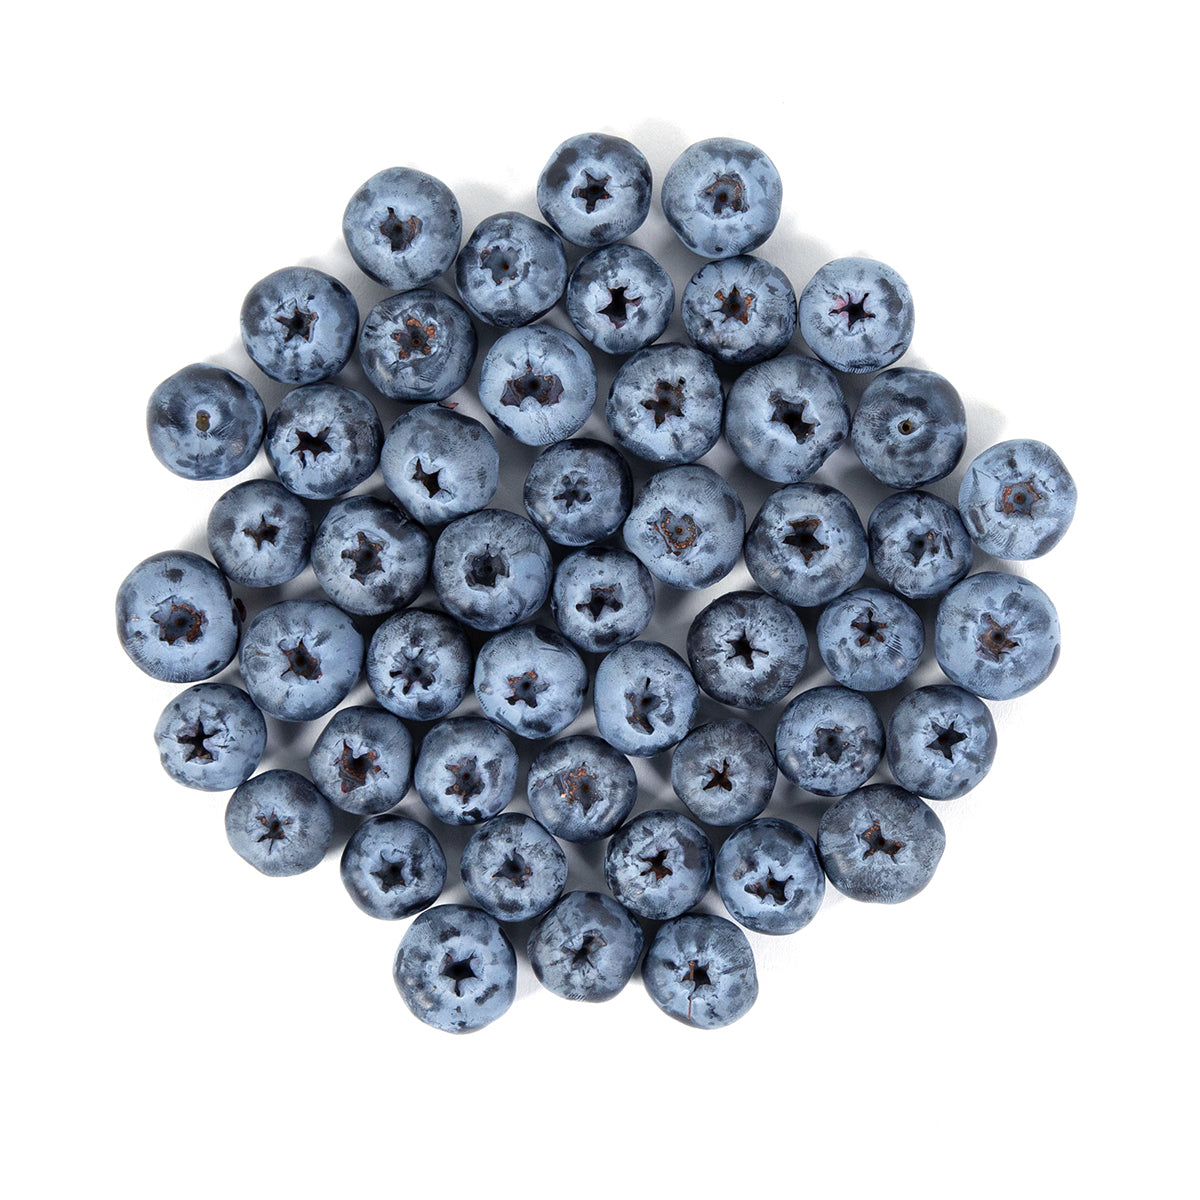 Driscoll'S Limited Edition Sweetest Batch Jumbo Blueberries 11 OZ